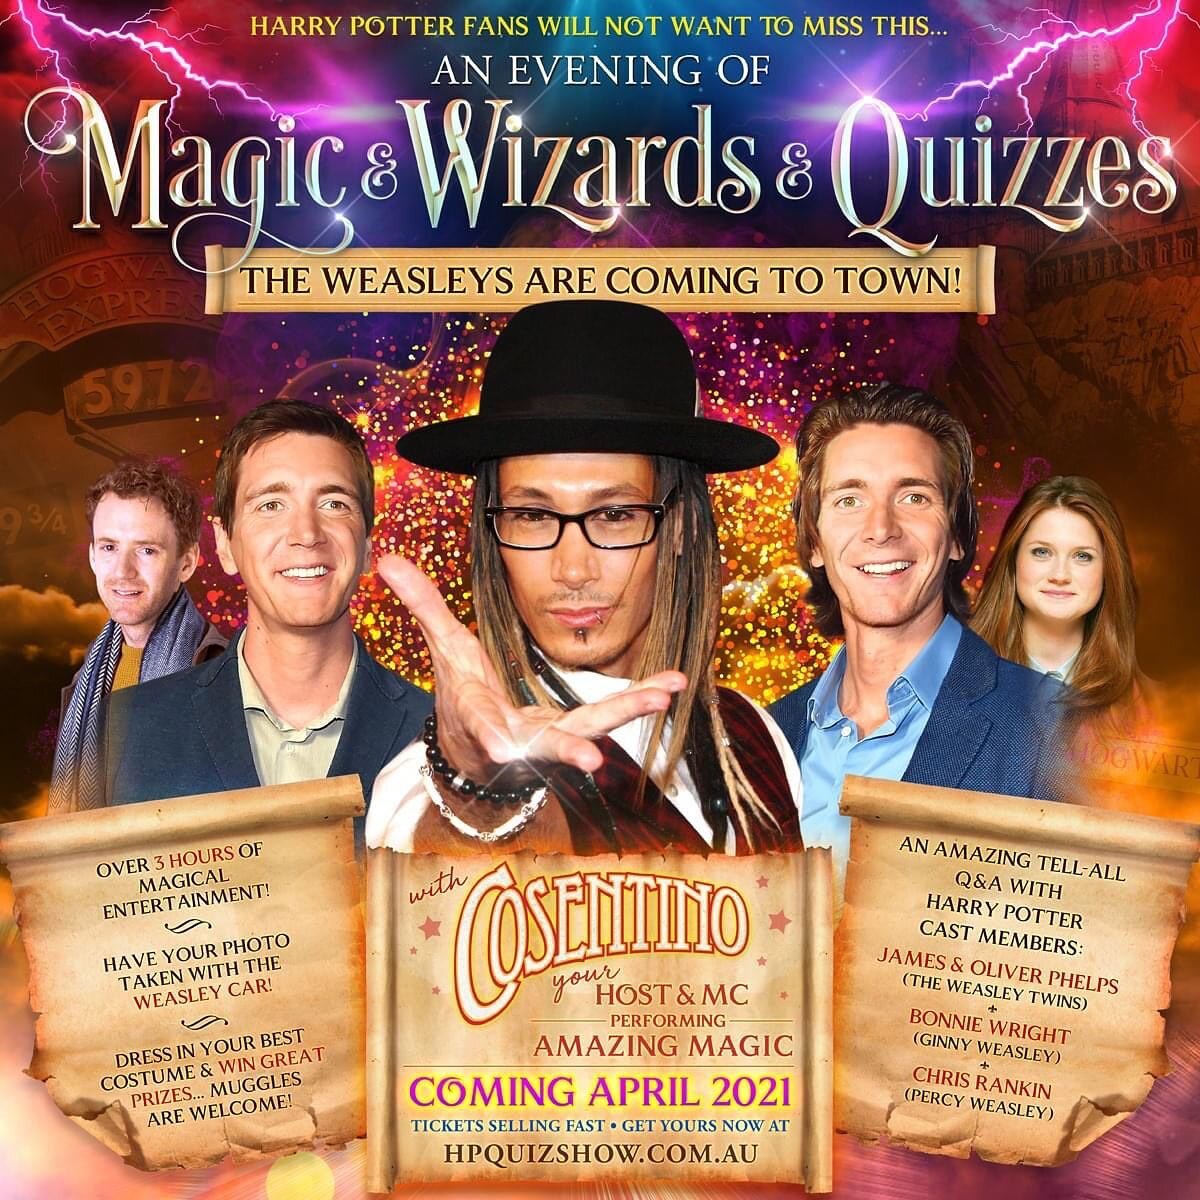 SO excited to be coming to Australia in 2021 and with the family, too!

Hope to see you there ⚡️❤️⚡️

 #wowza #magicwizardsandquizzes #harrypotter #weasley #australia #thatgingerbloke #chrisrankin #percyweasley #weasleytwins #ginnyweasley #weasleyfam